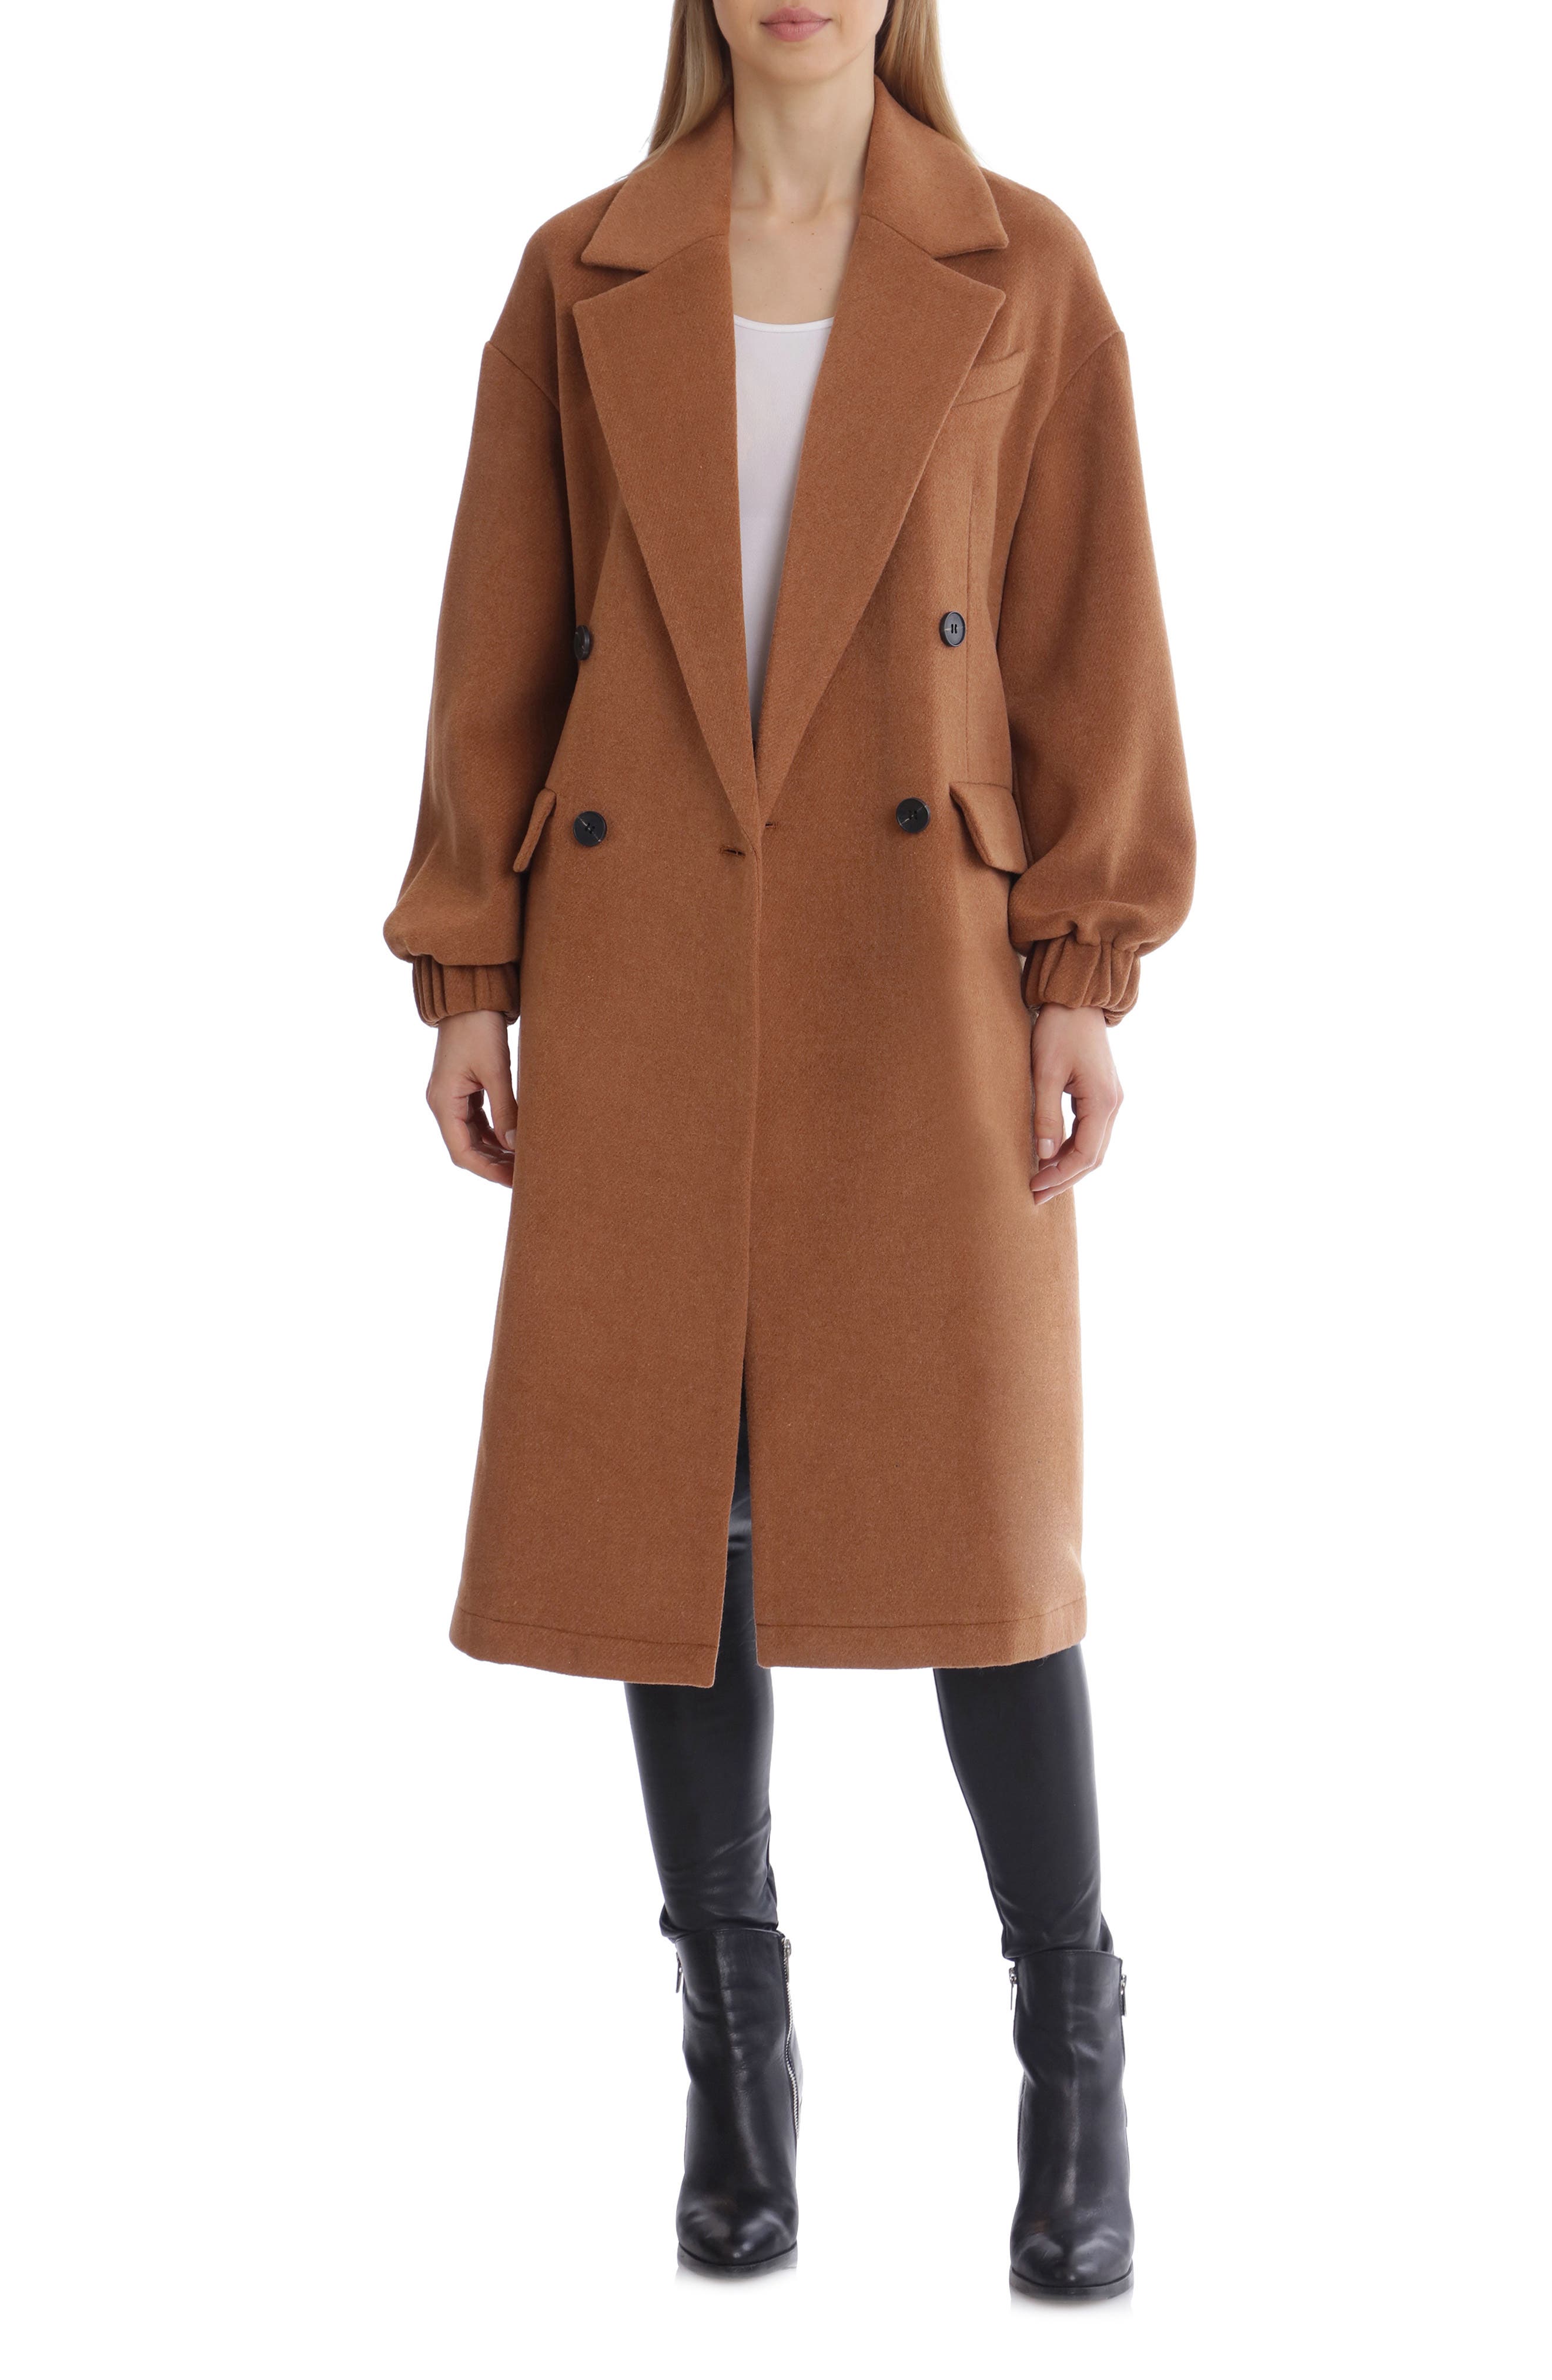 XL-5XL Lady Vintage Longline Swing Coat Plus Size Trench Double Breasted Jacket